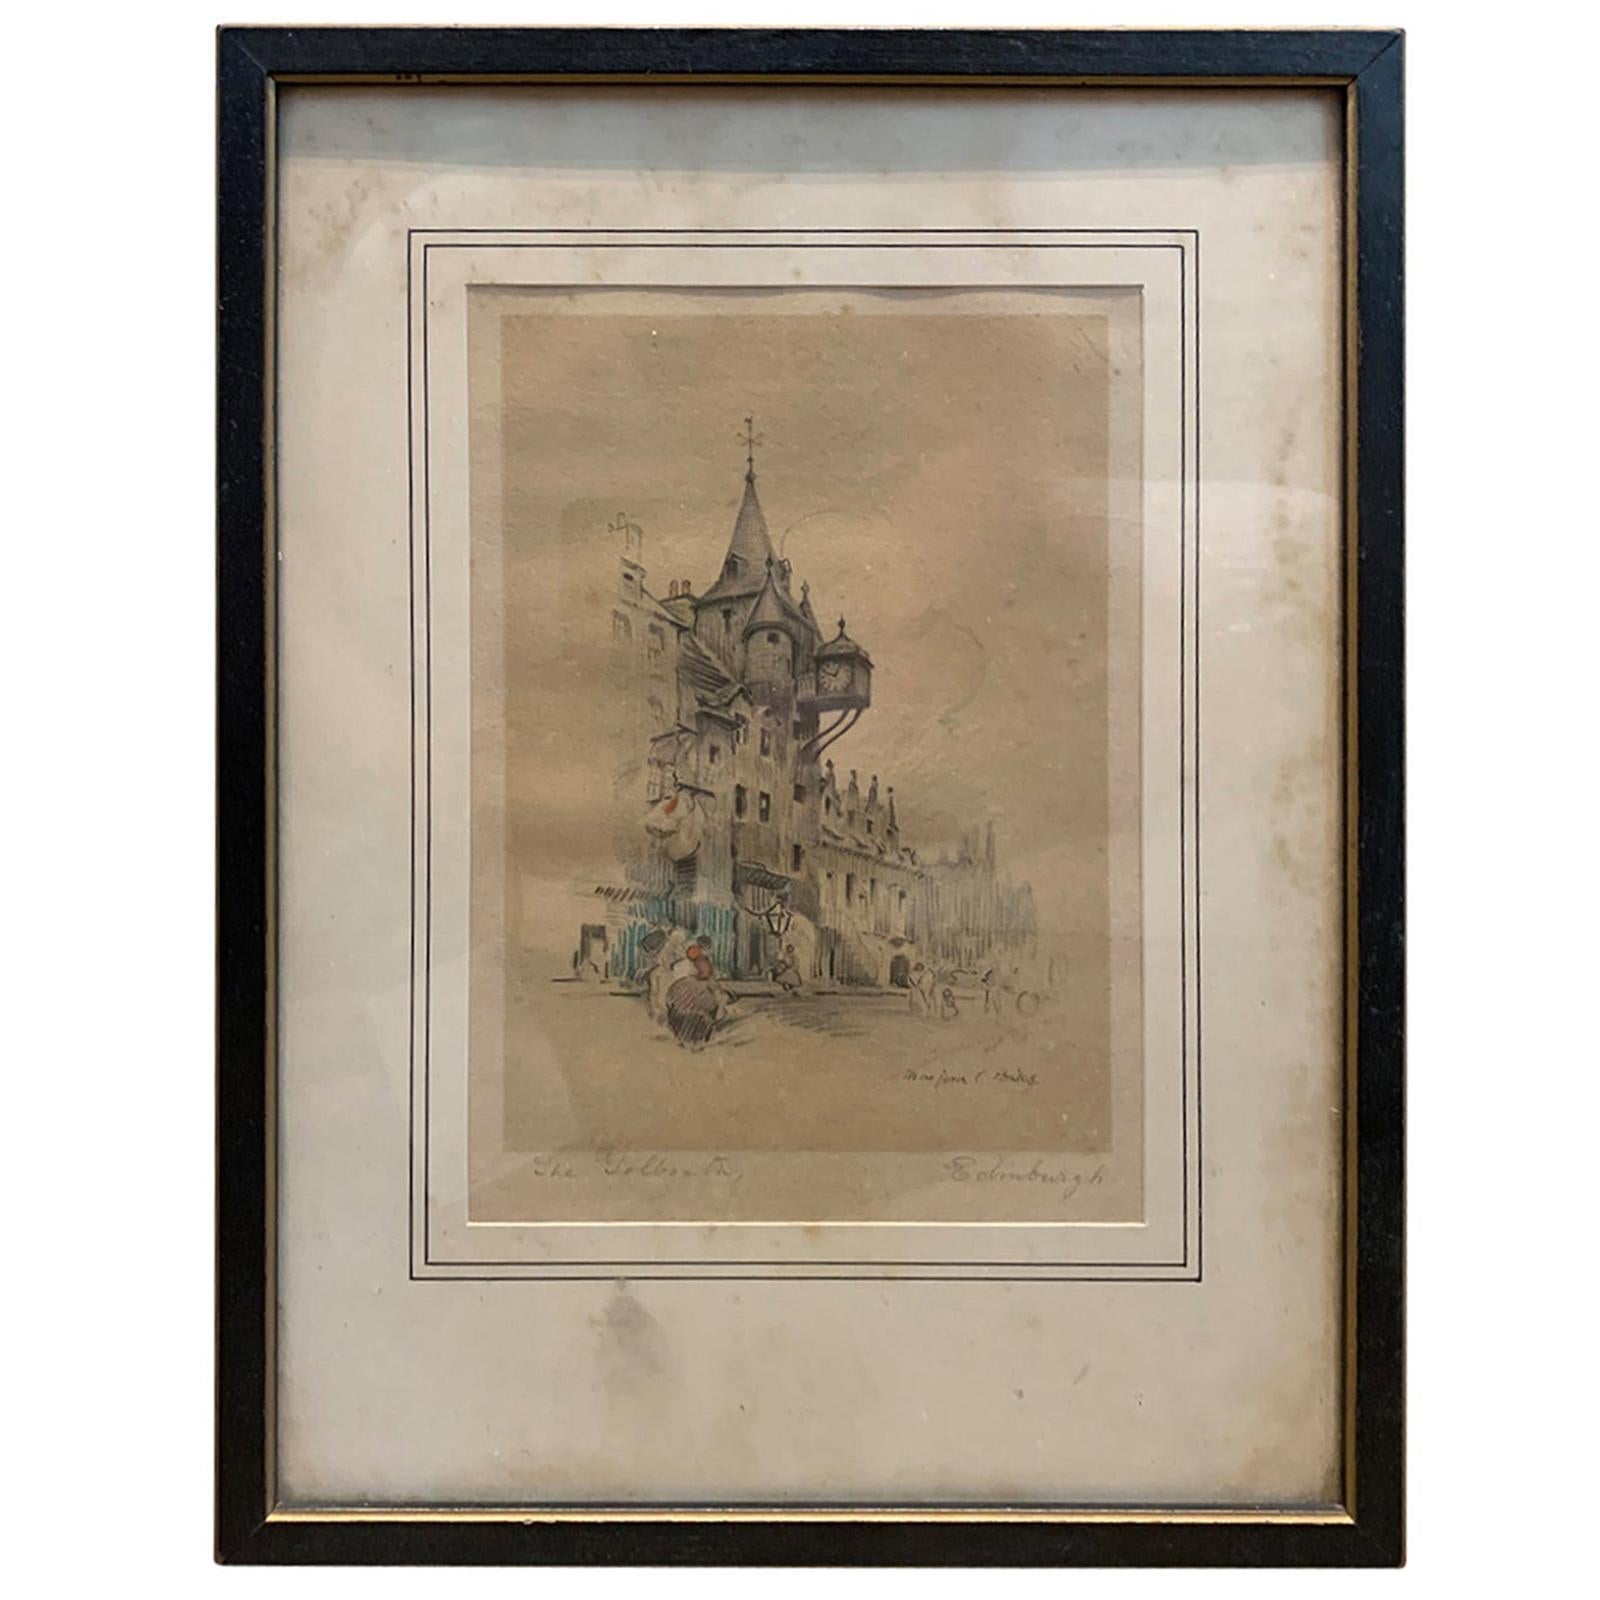 Early 20th Century English Pastel Drawing "The Tolbooth" by Marjorie C. Bates For Sale